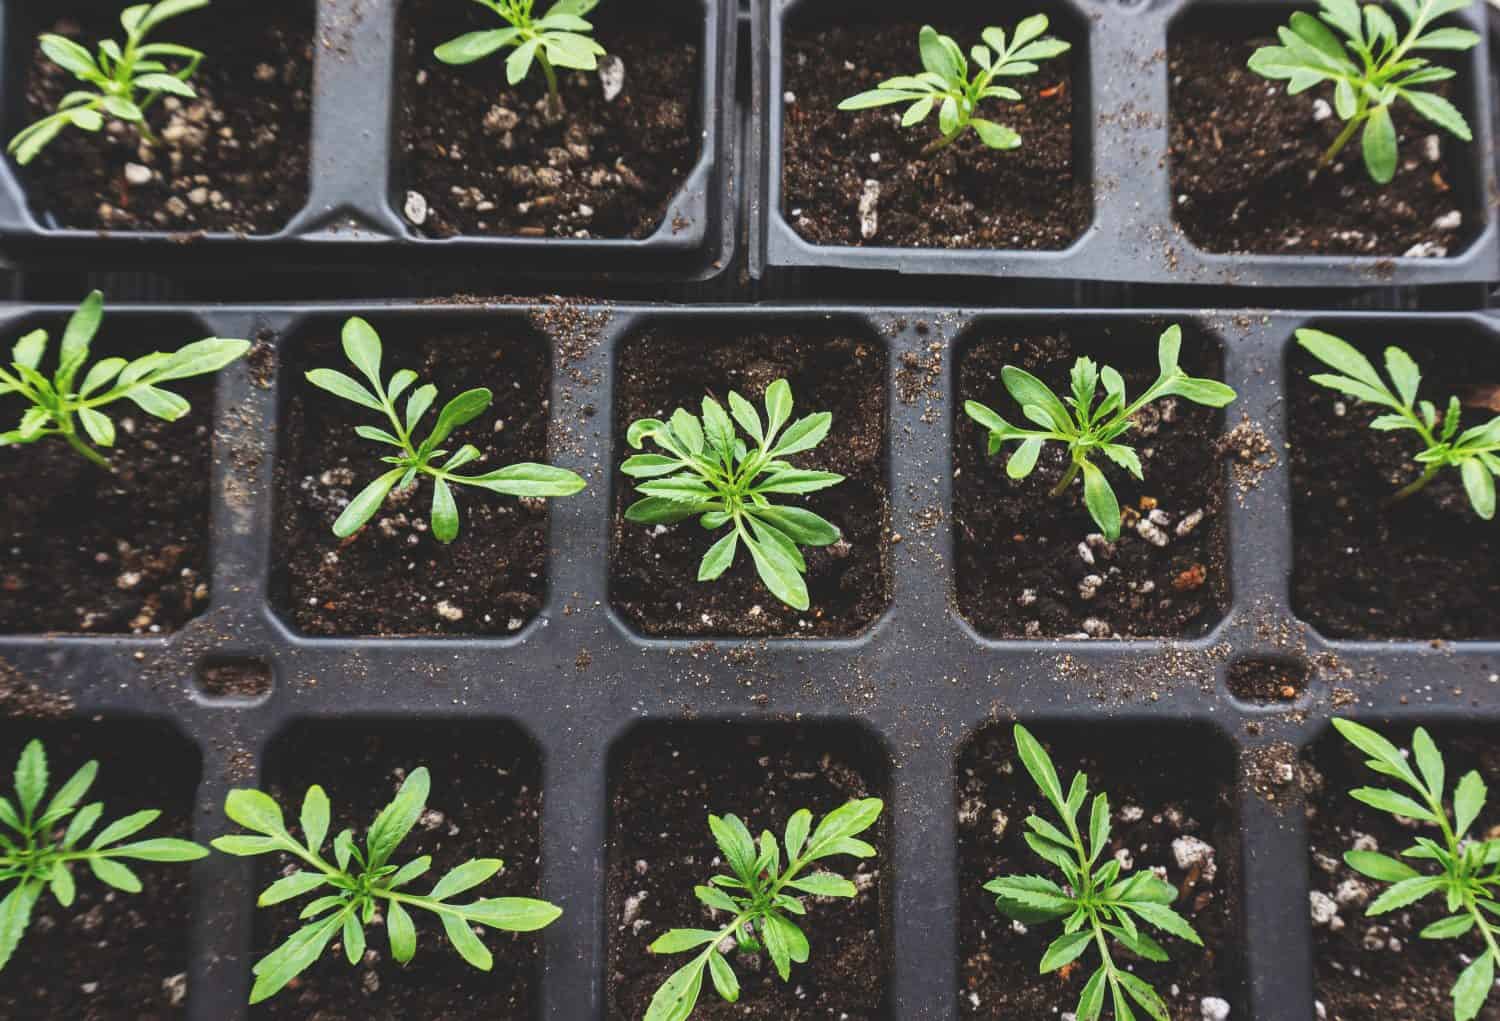 Small Marigold or Tagetes seedlings grow in soil in small plastic pots, top view, close-up.